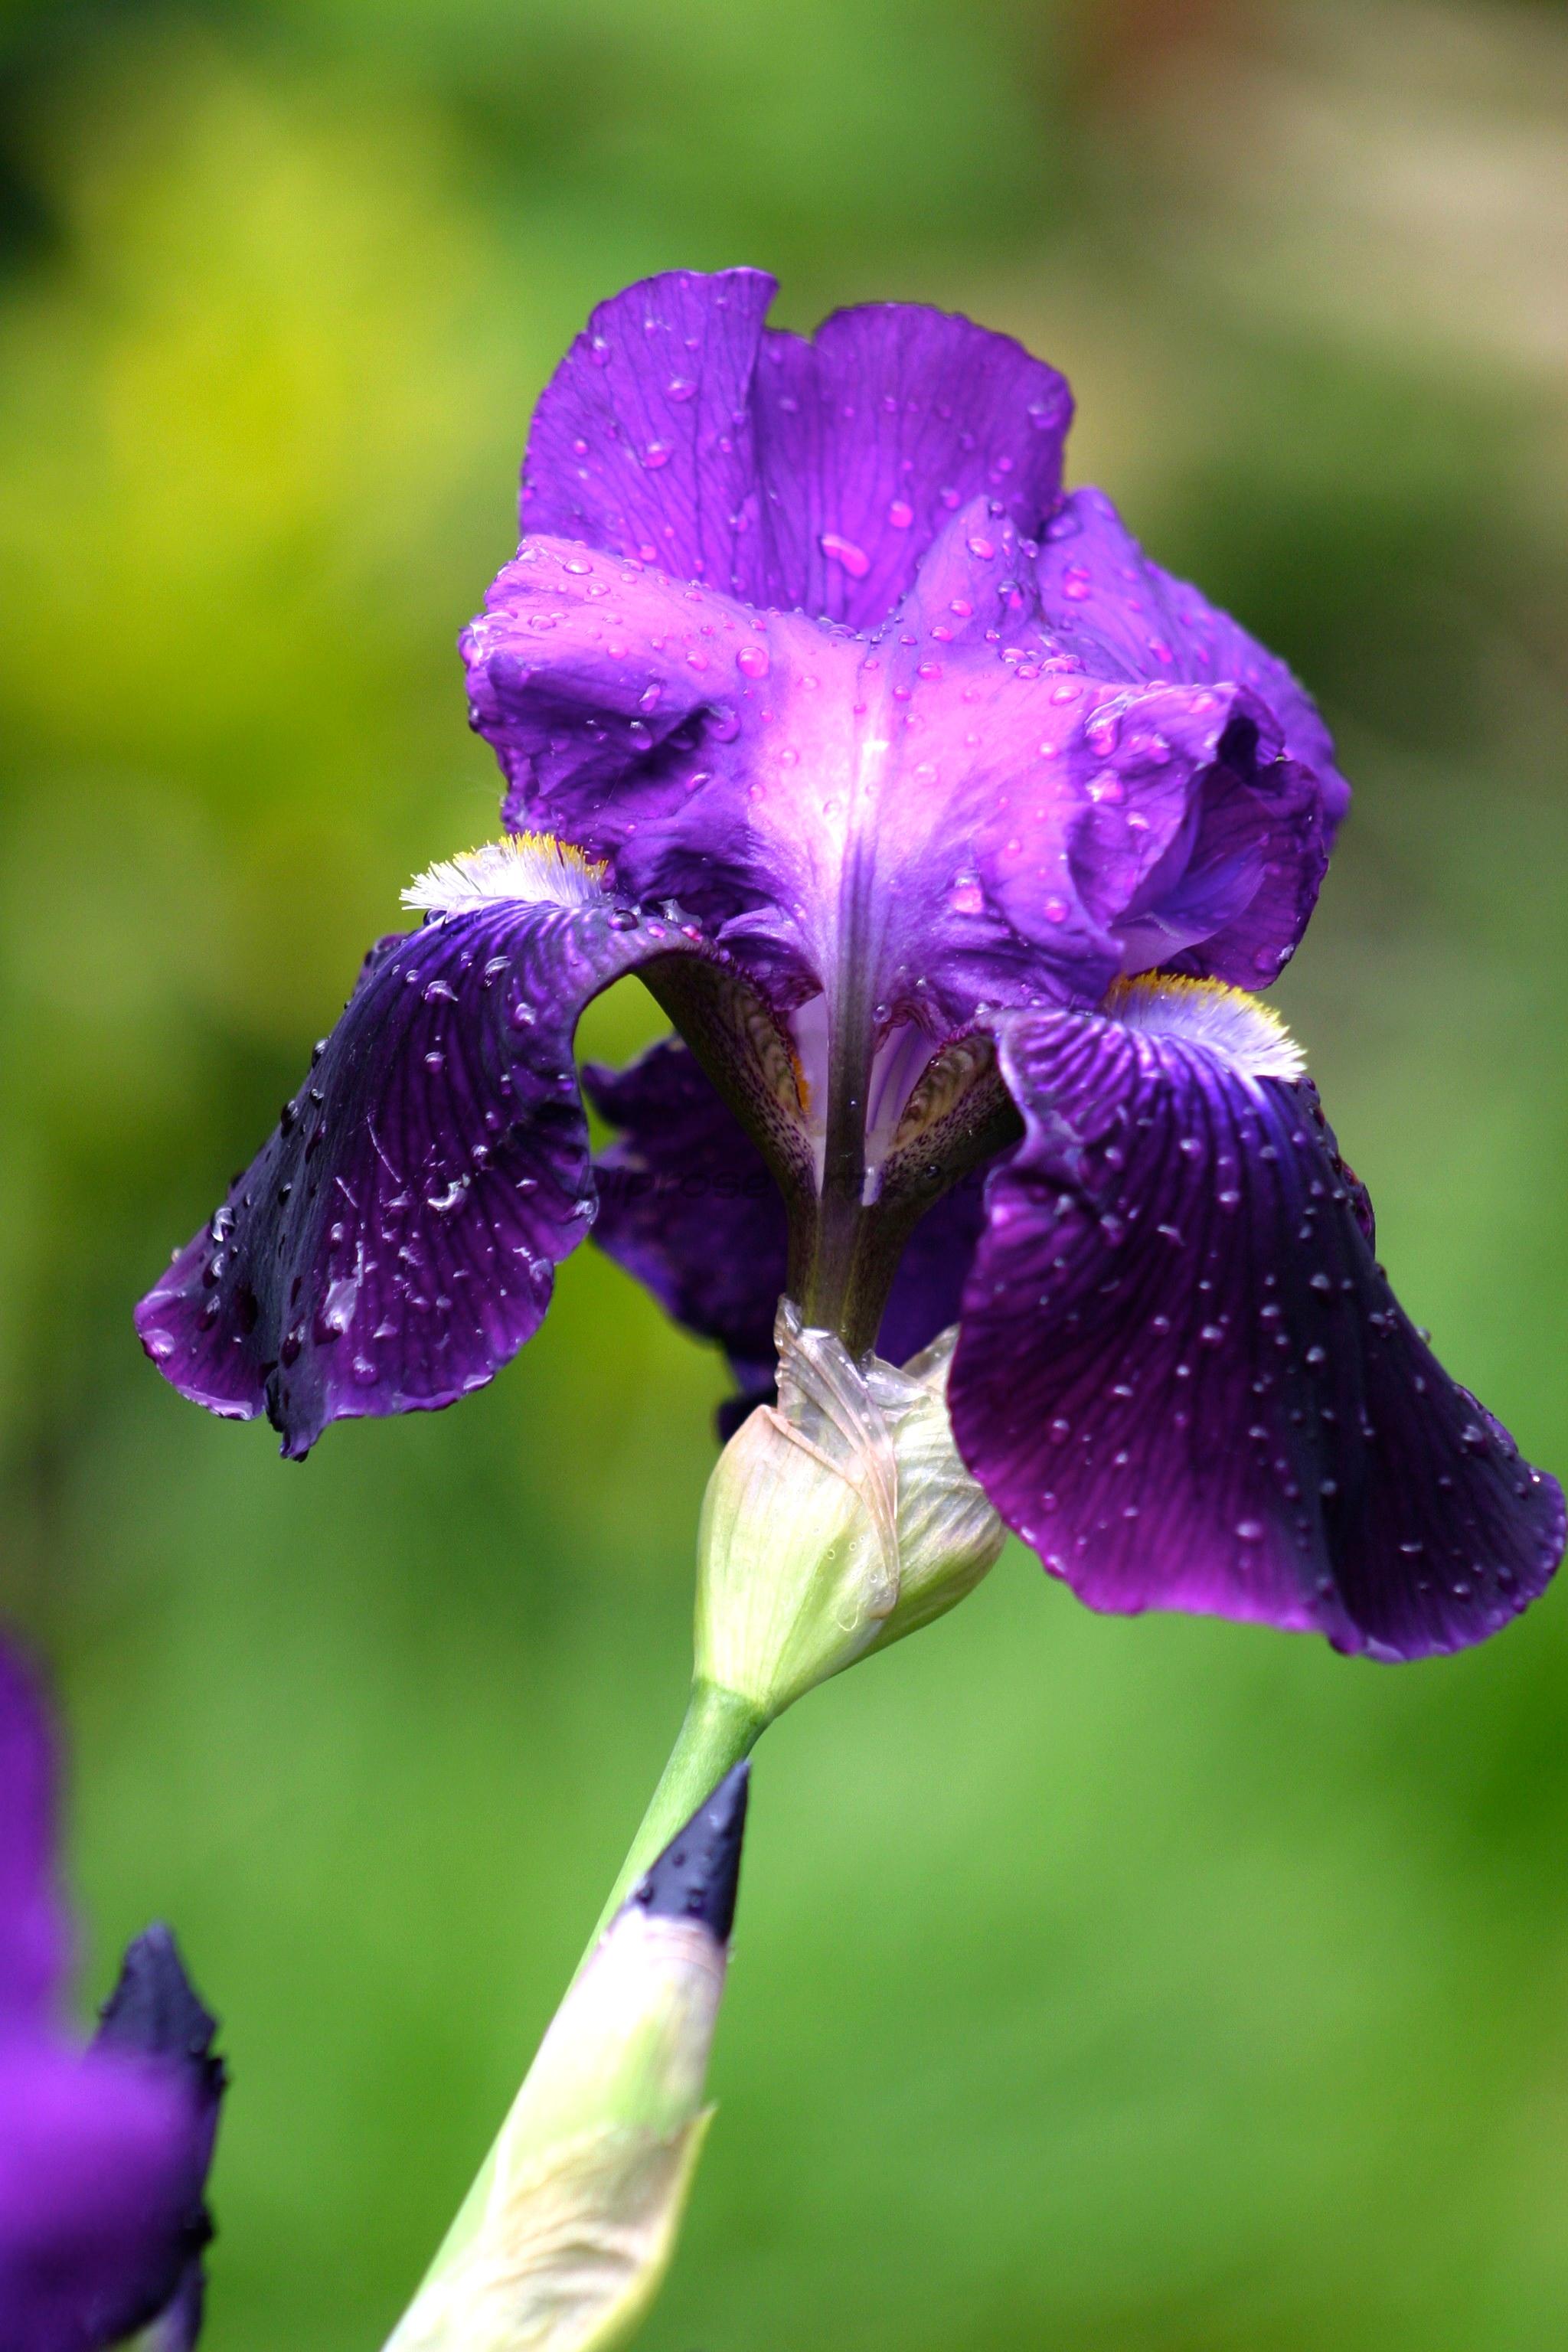 The shapes of Iris are so beautiful and I really like the depth of colour